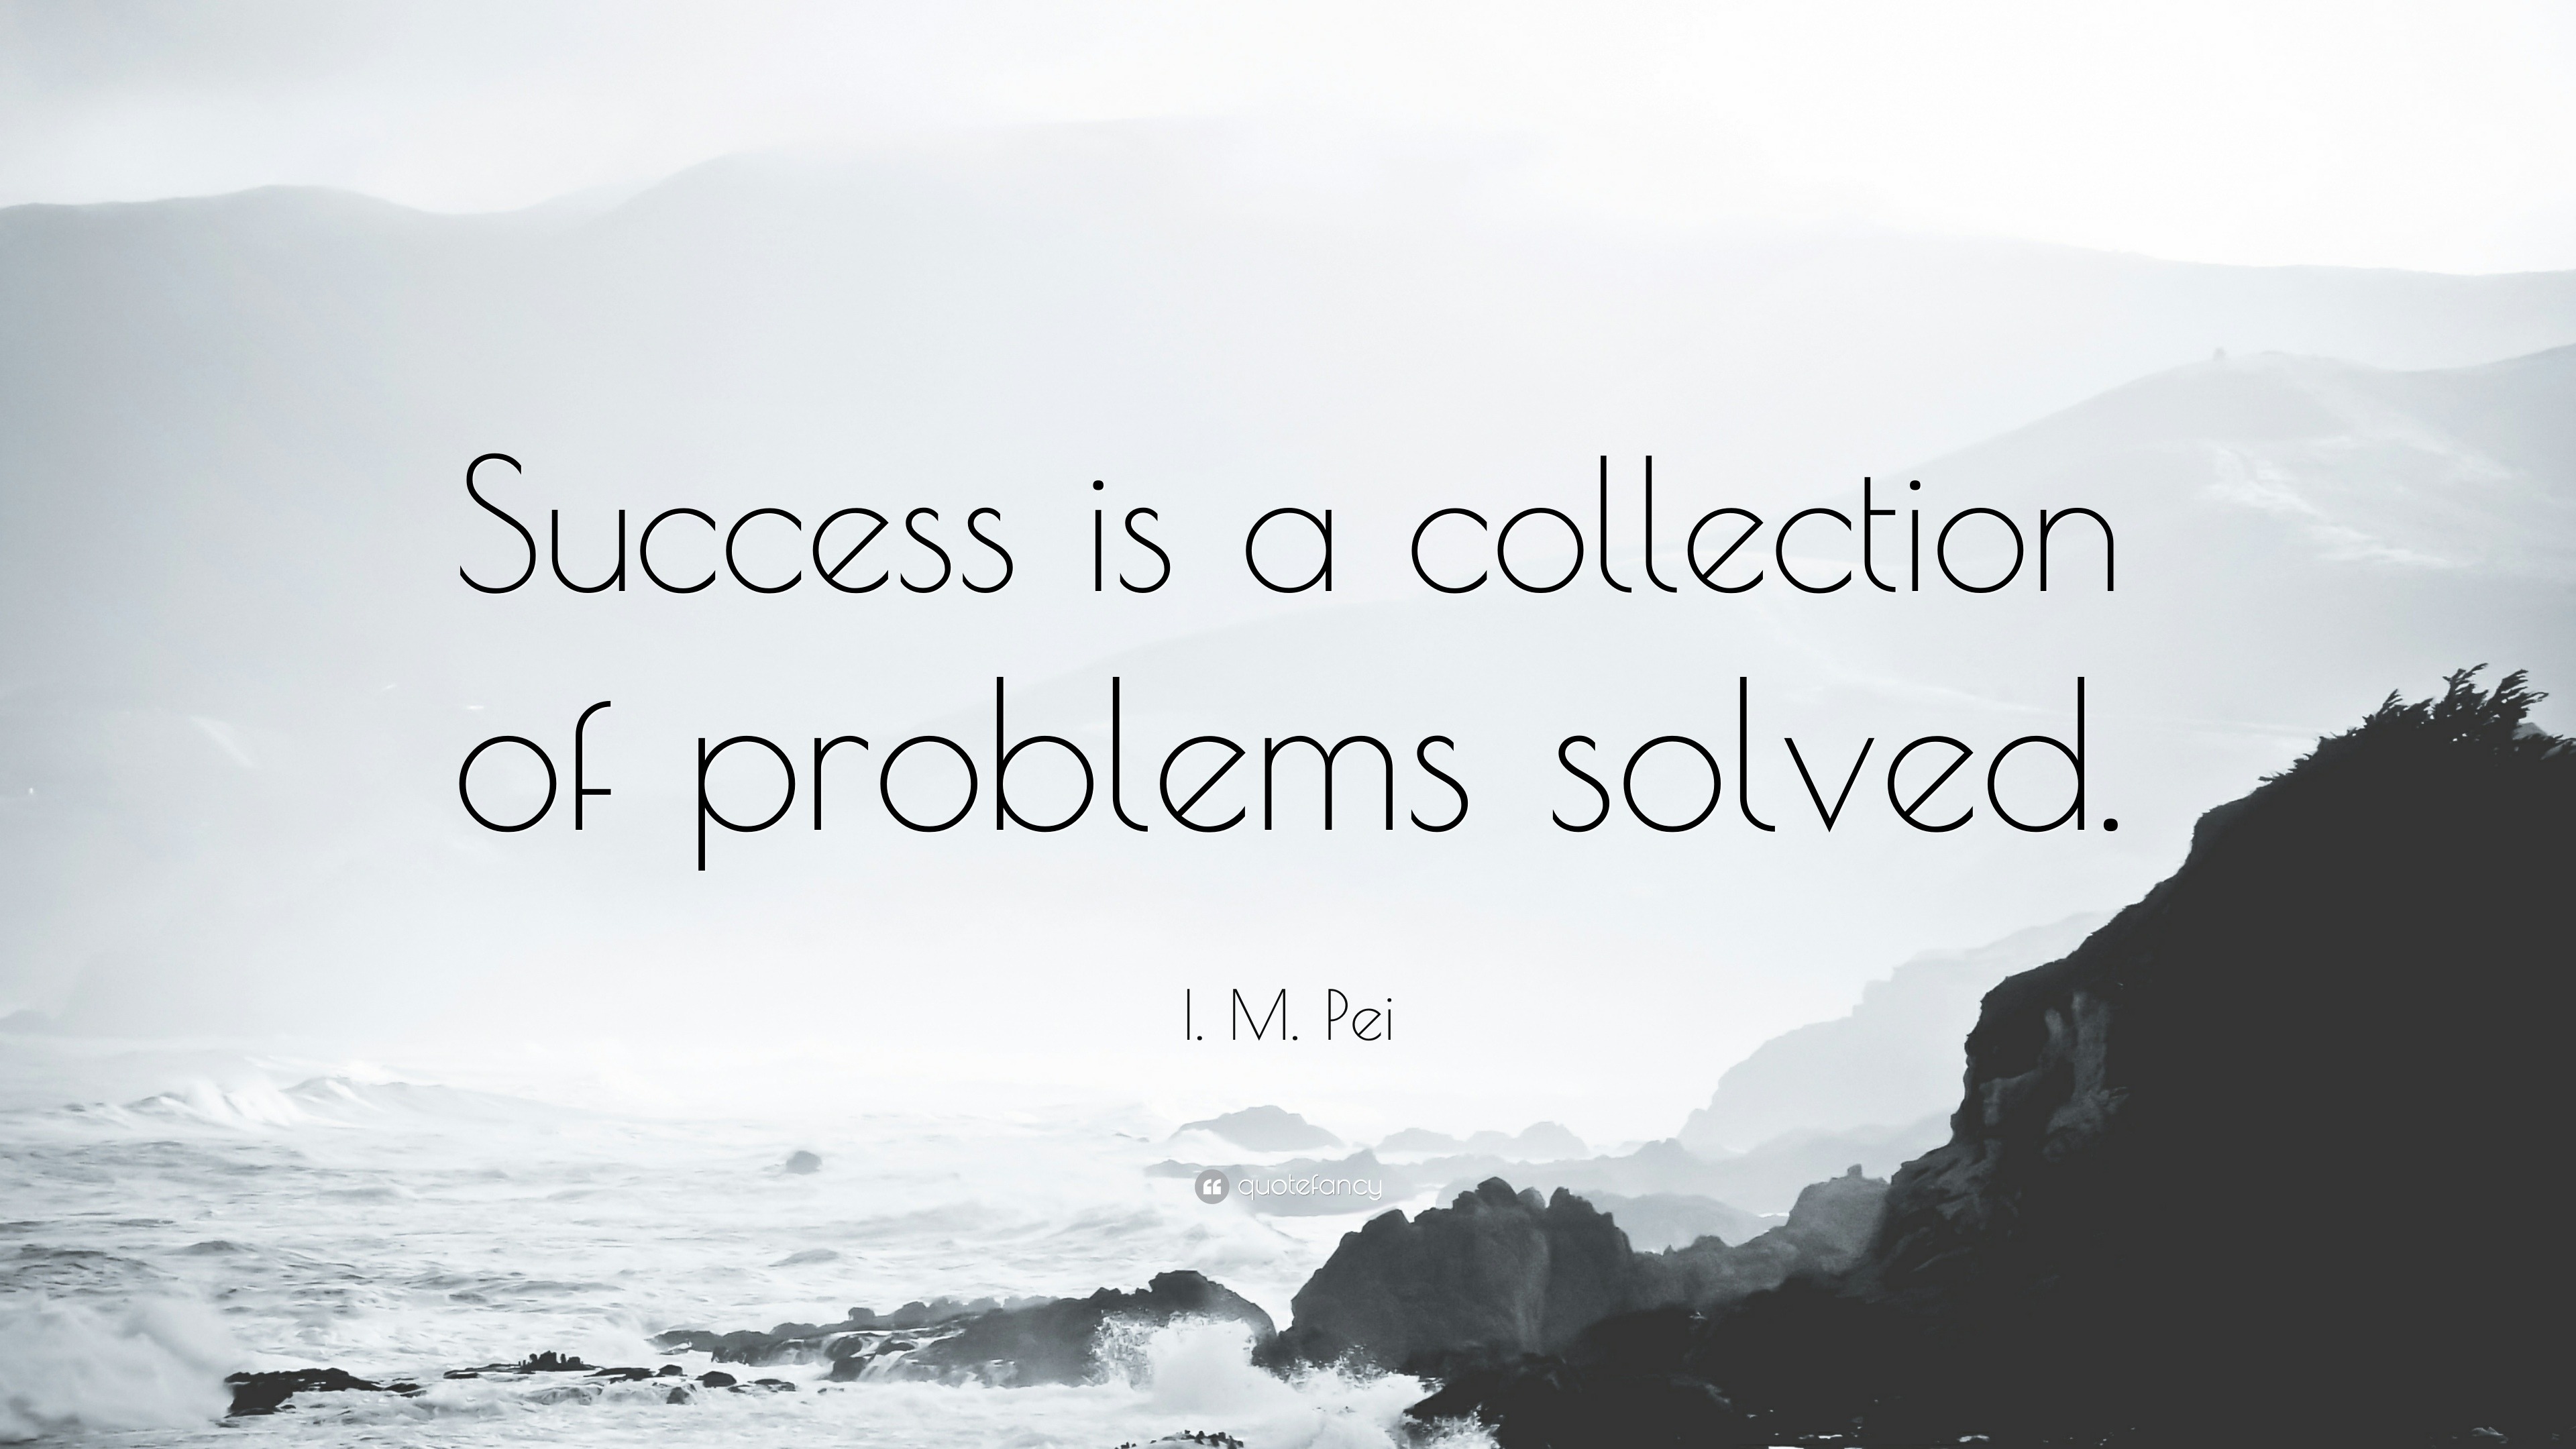 I M Pei Quote “success Is A Collection Of Problems Solved”